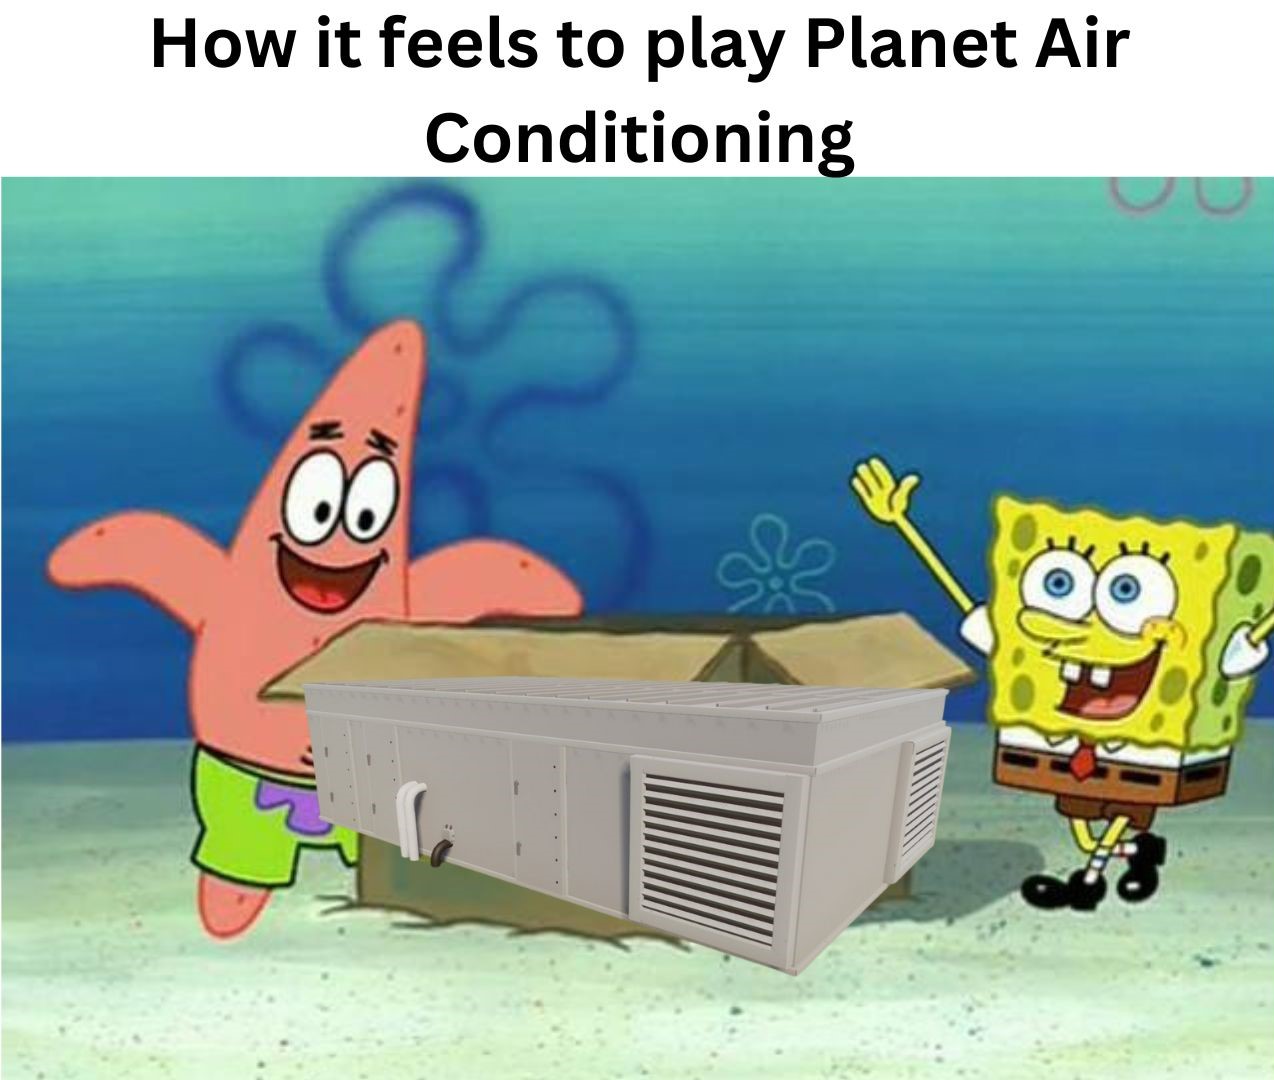 How it feels to play Planet Air Conditioning.jpg